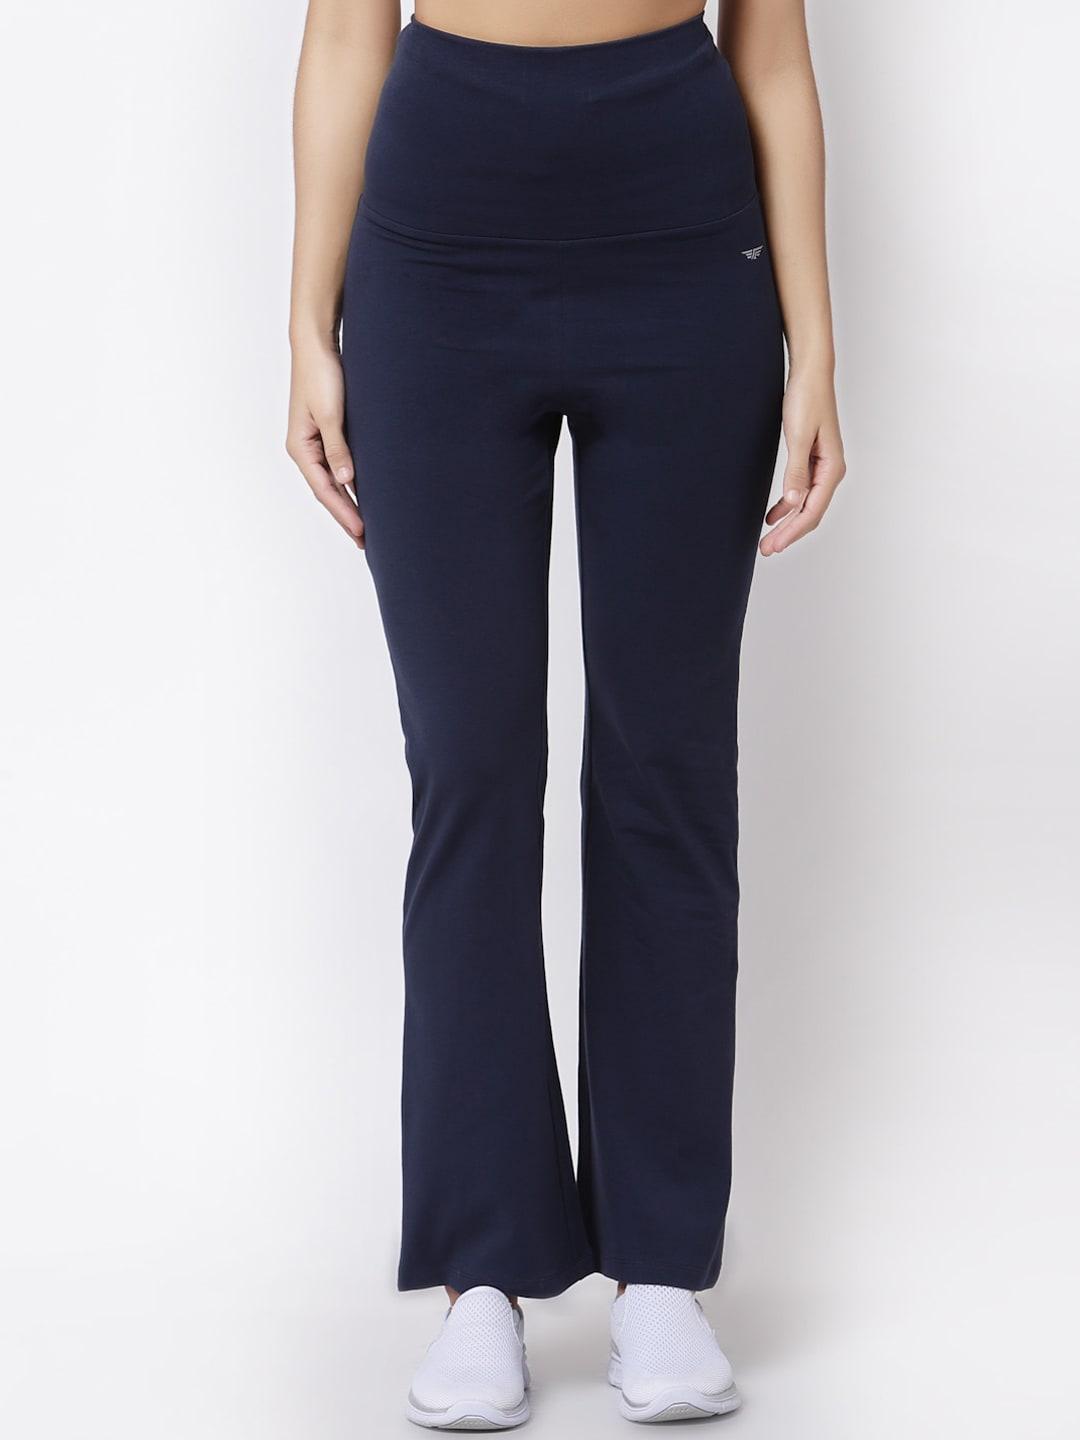 red tape women navy blue solid yoga track pants